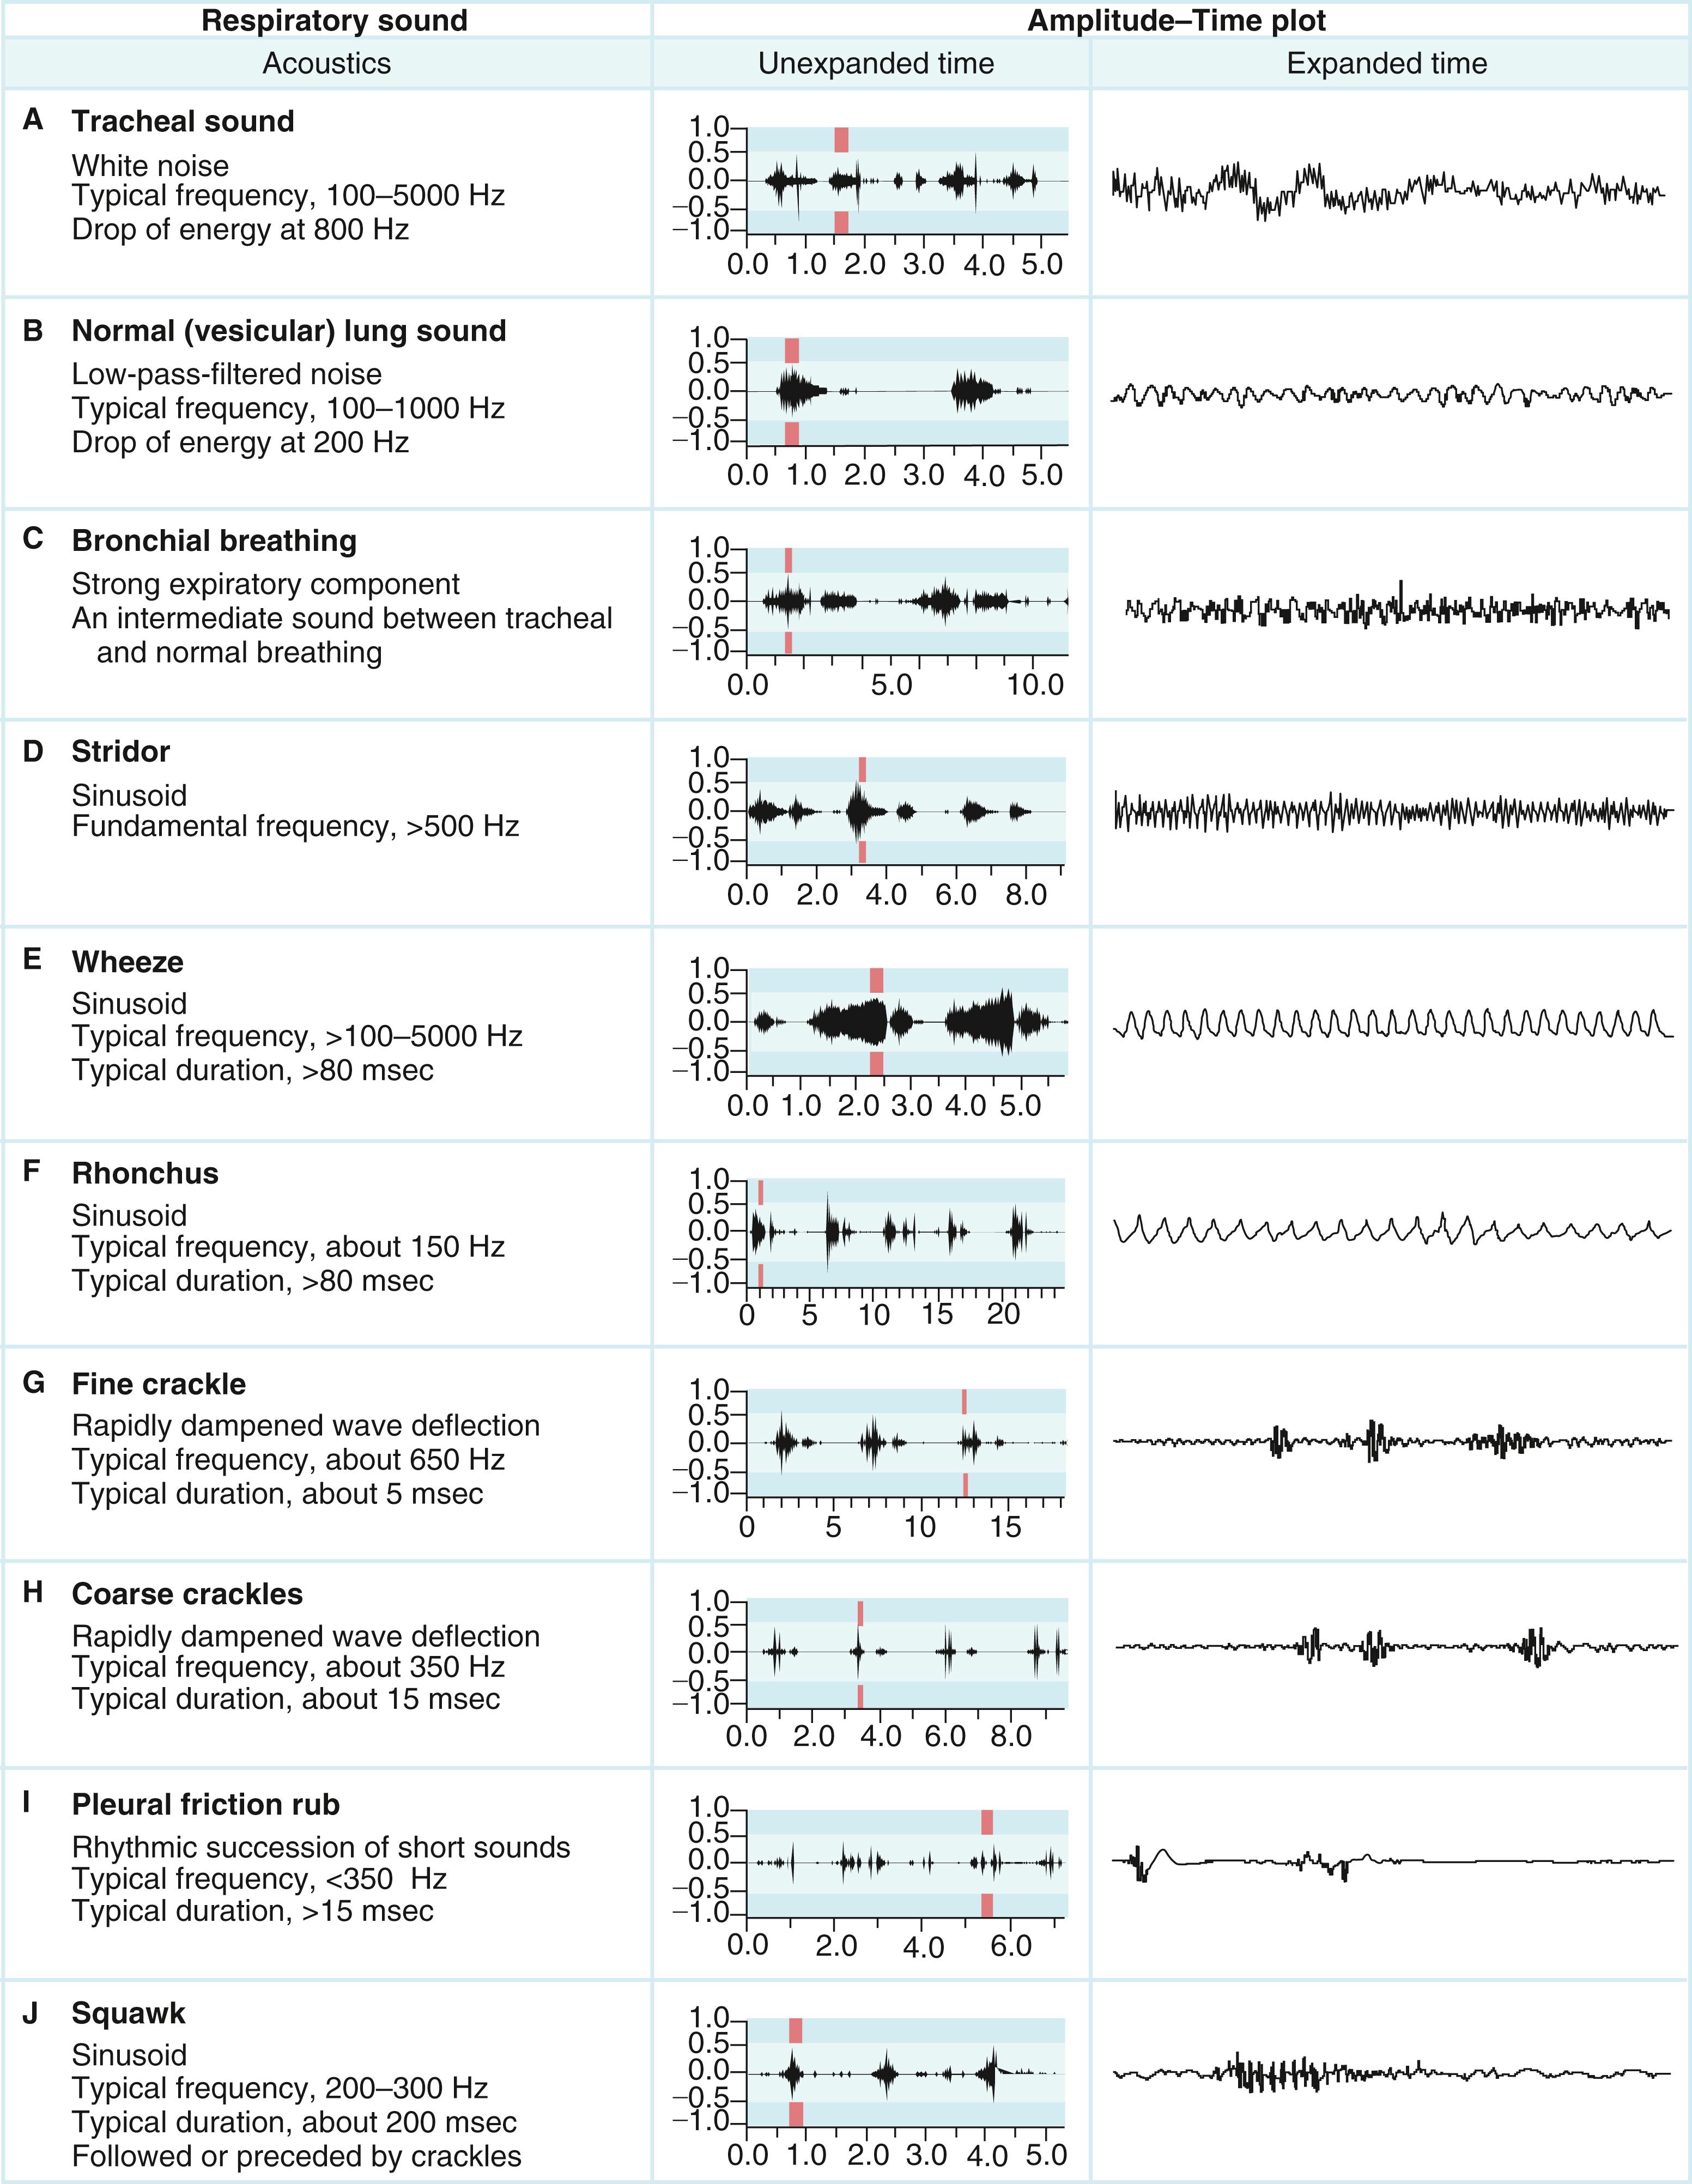 FIGURE 13.2, Respiratory sounds and the acoustic waveforms.